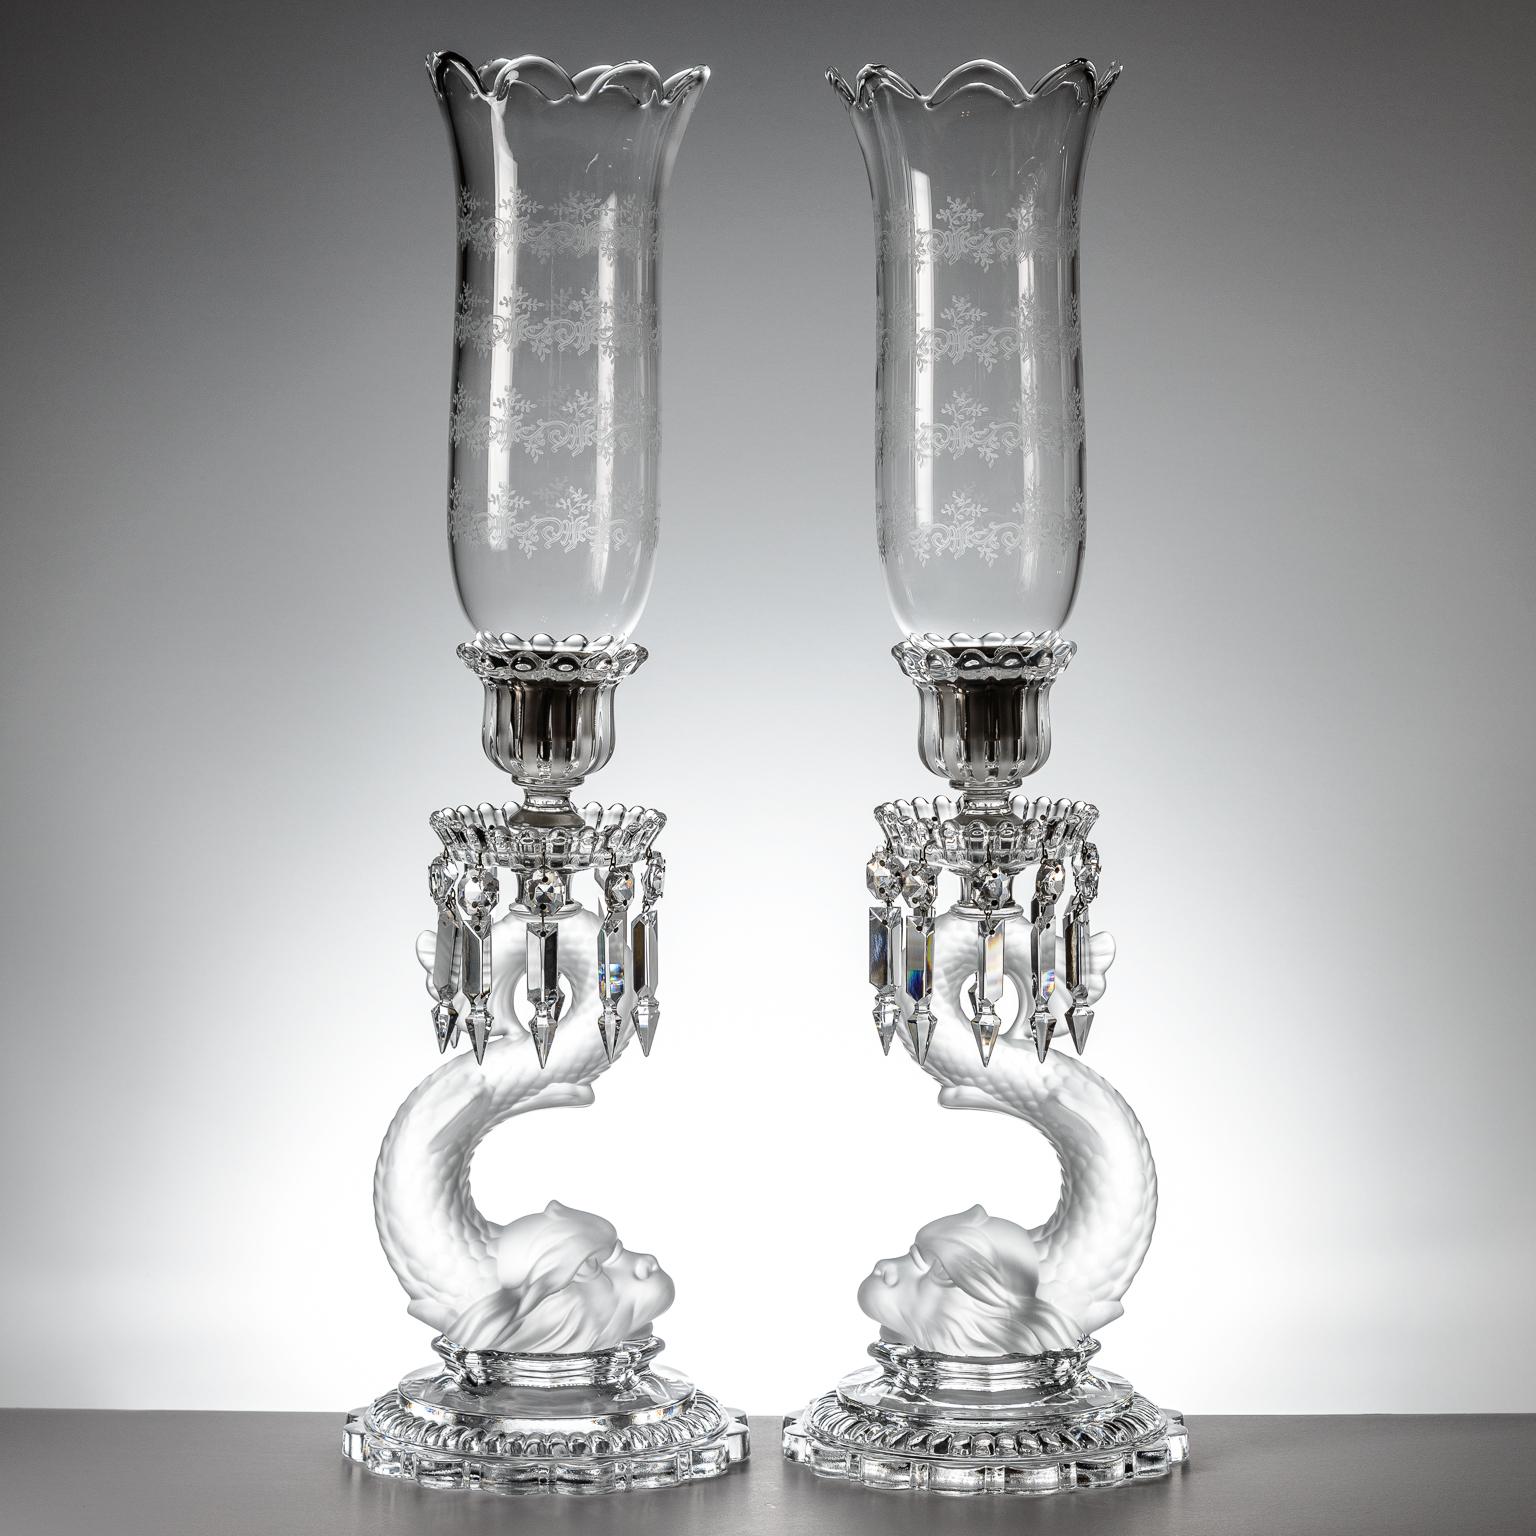 A wonderful pair of blown crystal candle sticks featuring Baccarat's classic dolphin base with shaped base, prisms and original tall hurricane globes. This versatile pair can be used with or without their shades for an elegant setting. In very good